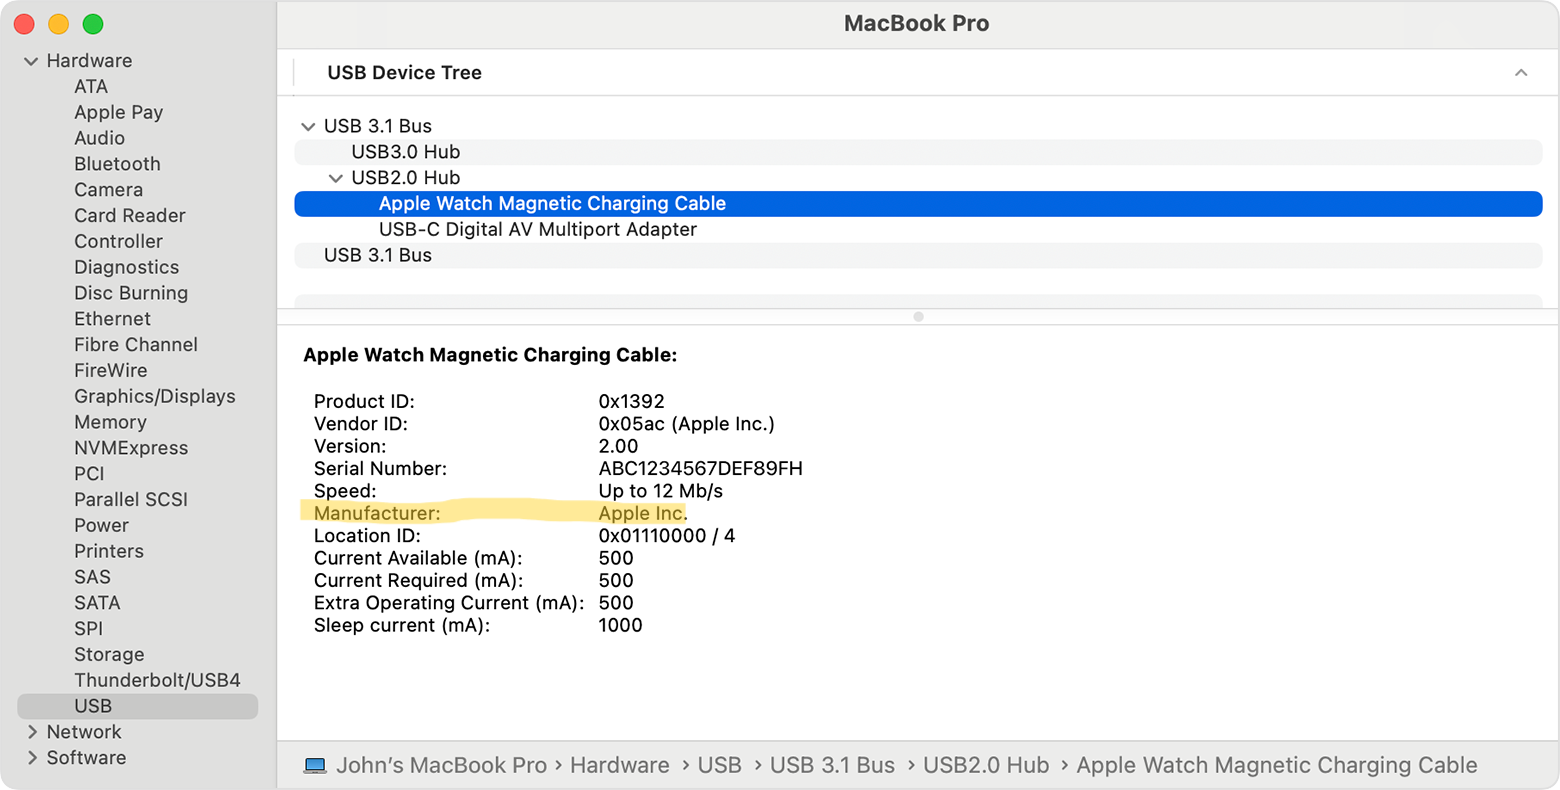 The mac interface showing Apple as the manufacturer of the Apple Watch charger